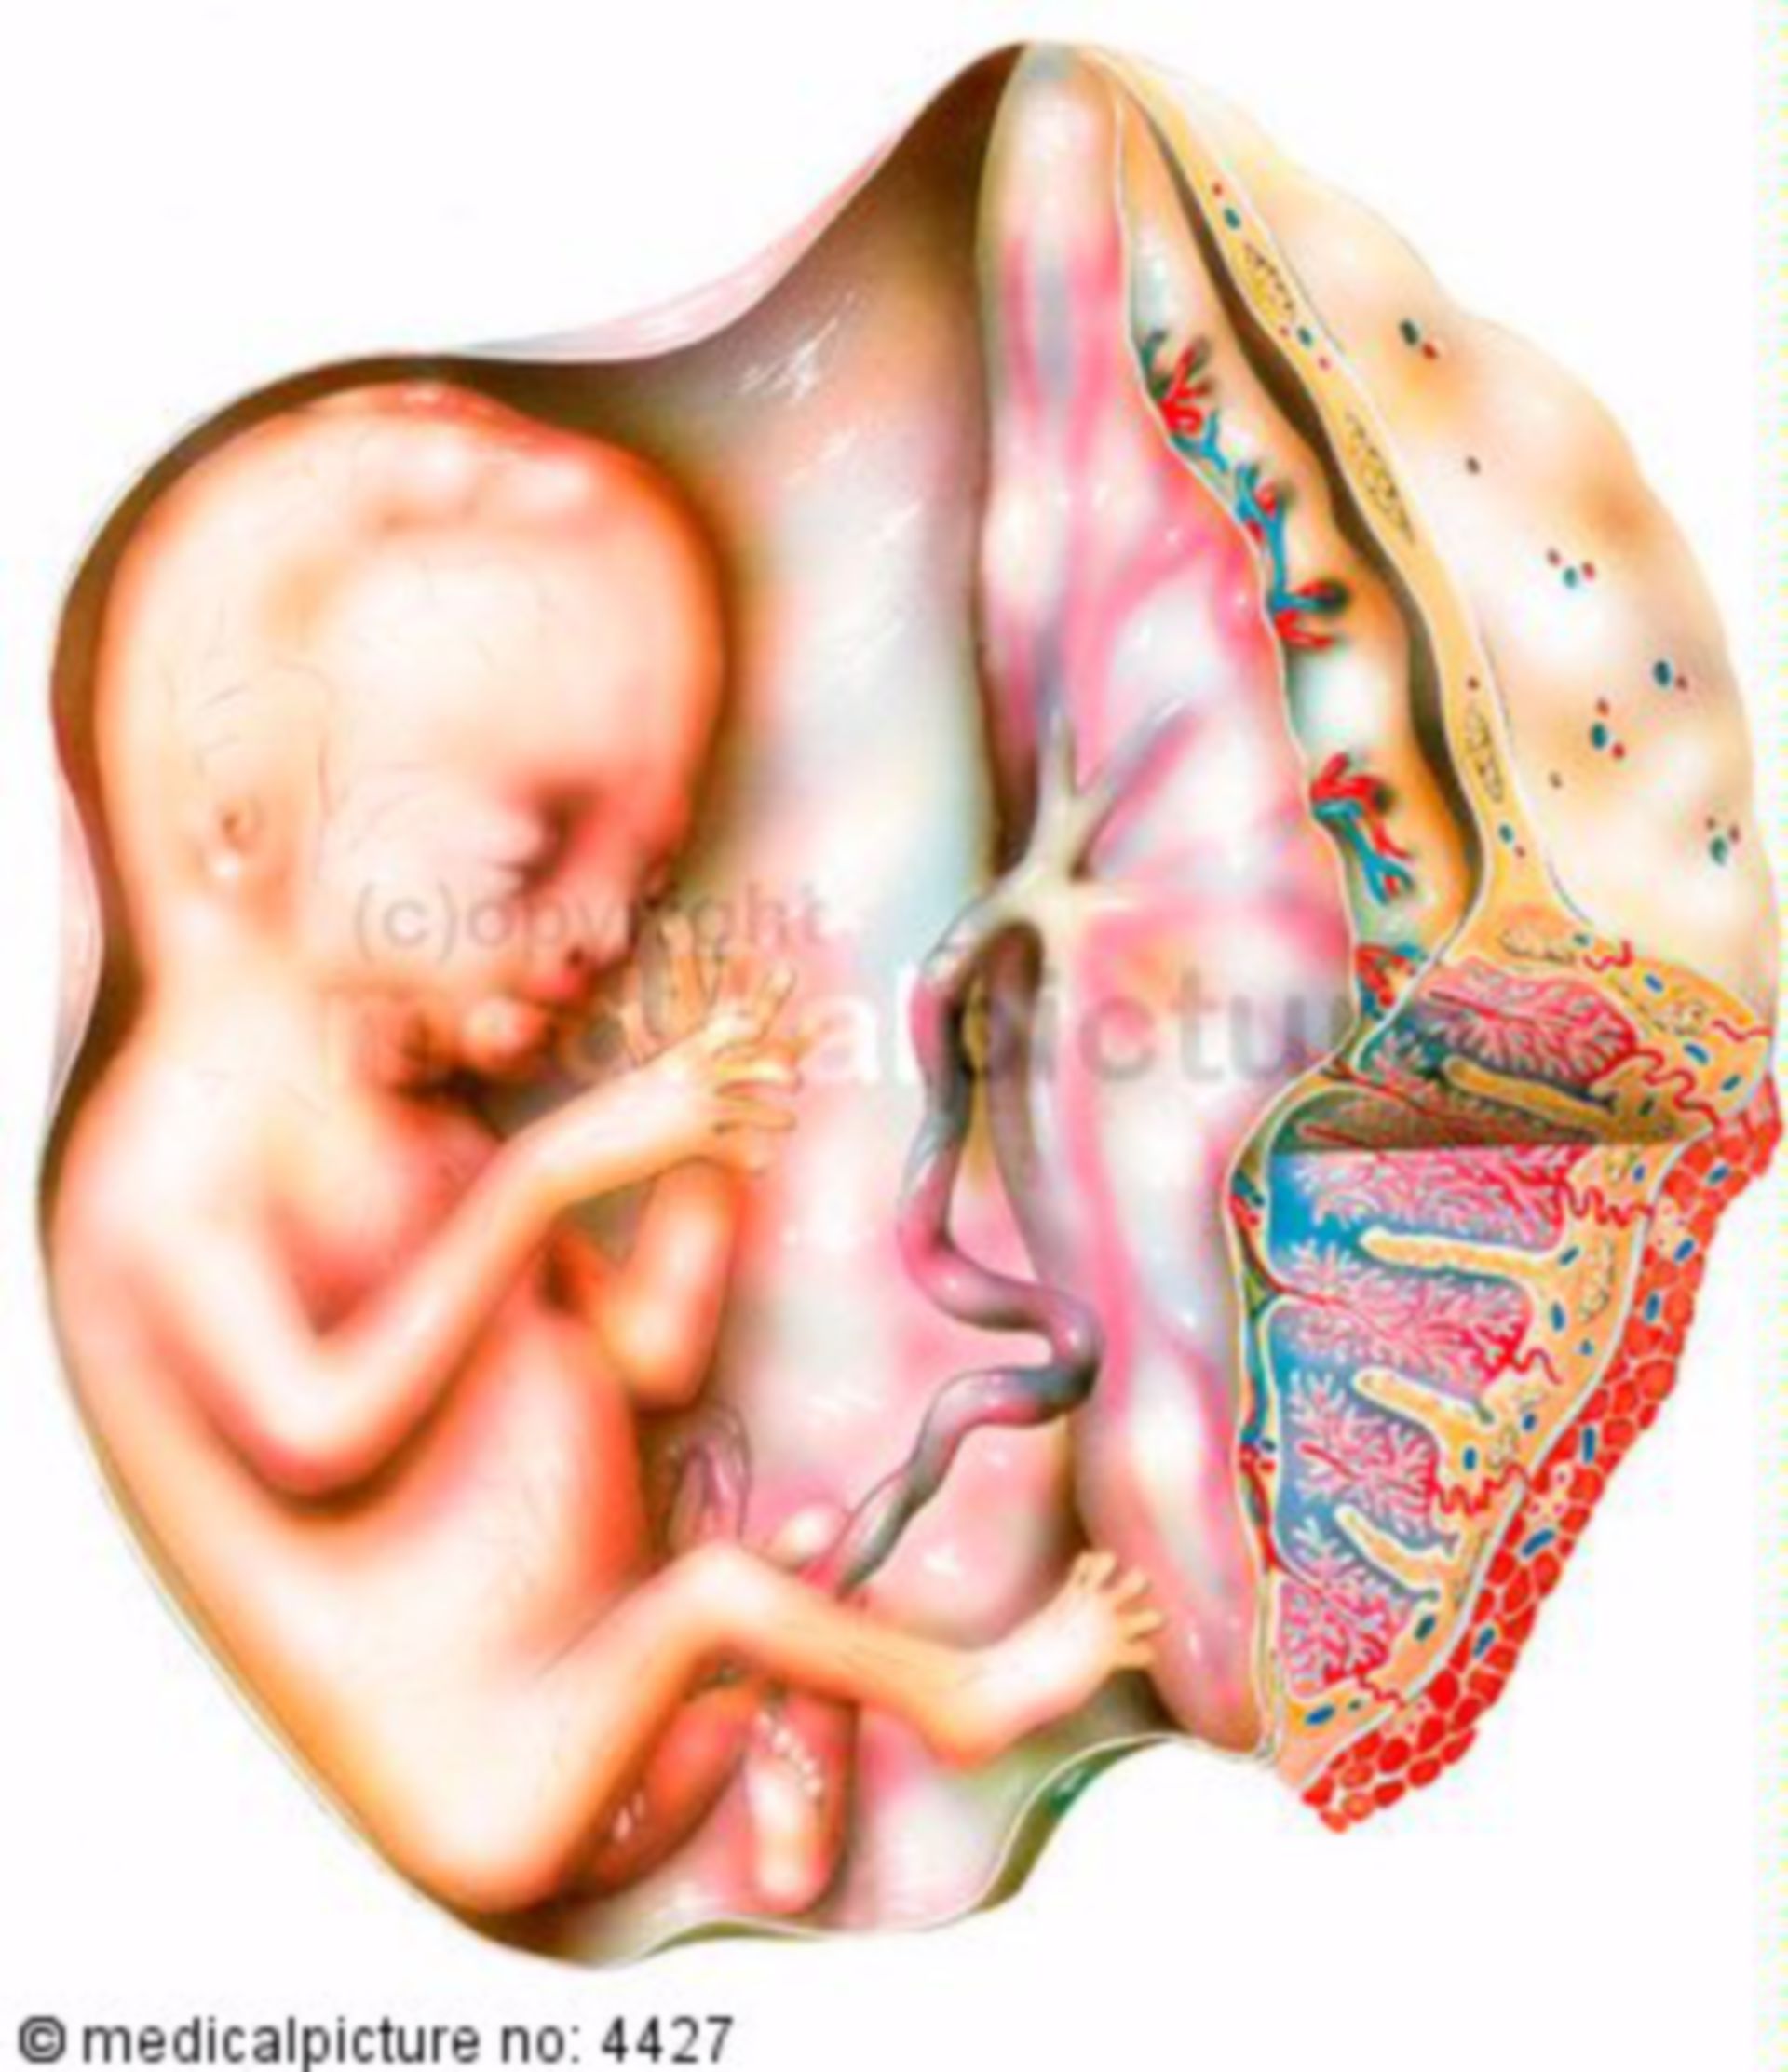 Embryo with placenta